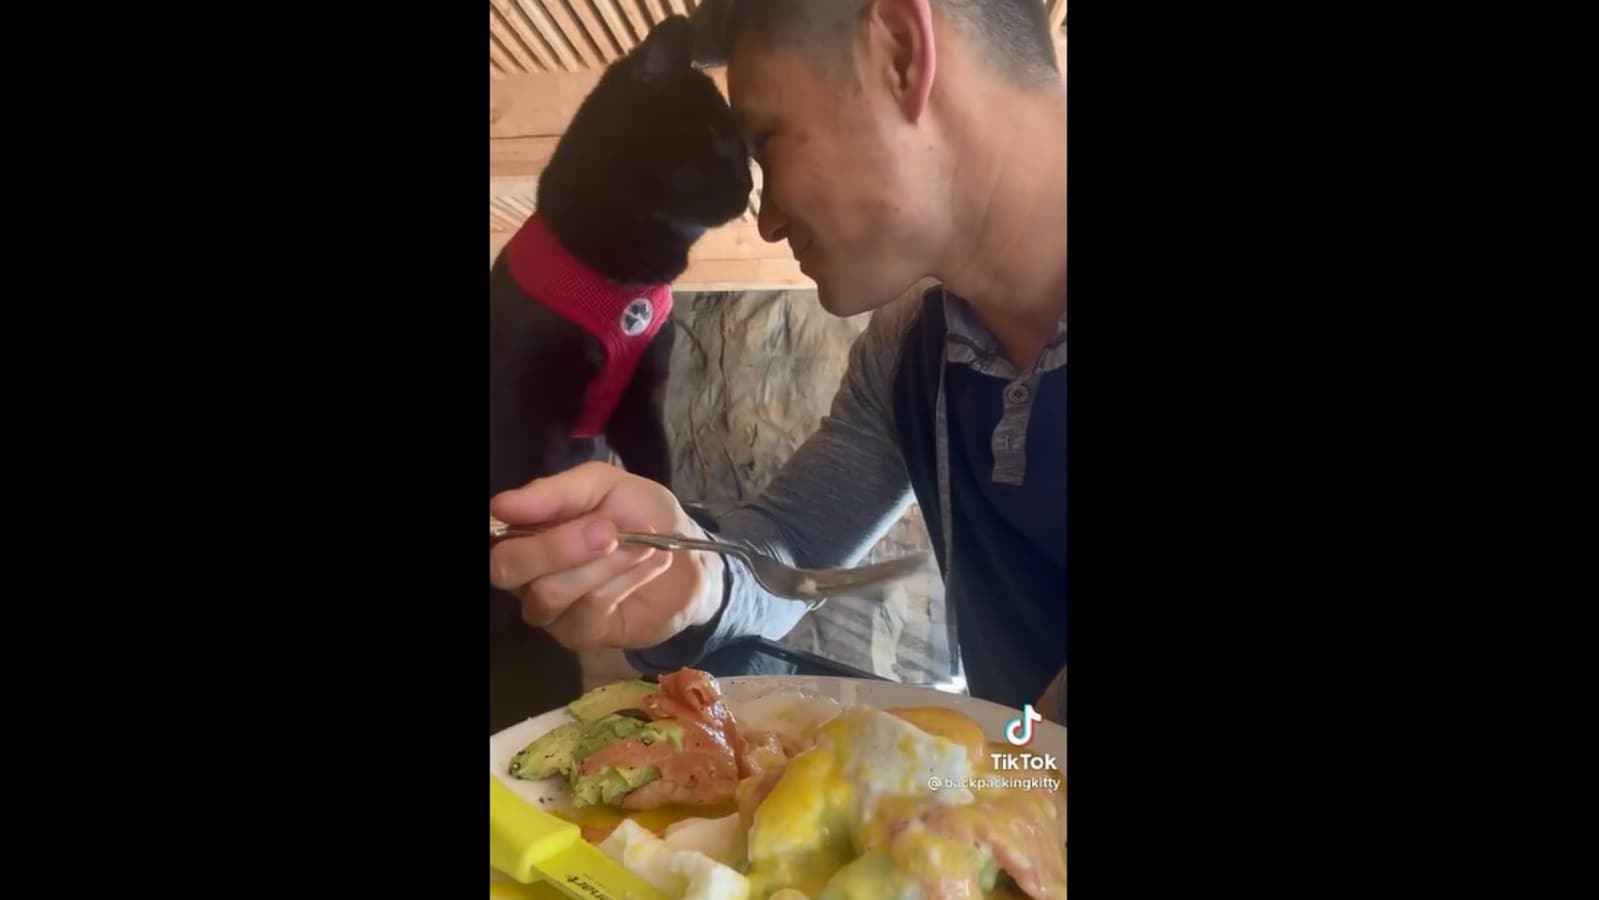 Cat distracts man to steal food. Watch how the kitty accomplishes its mission | Trending